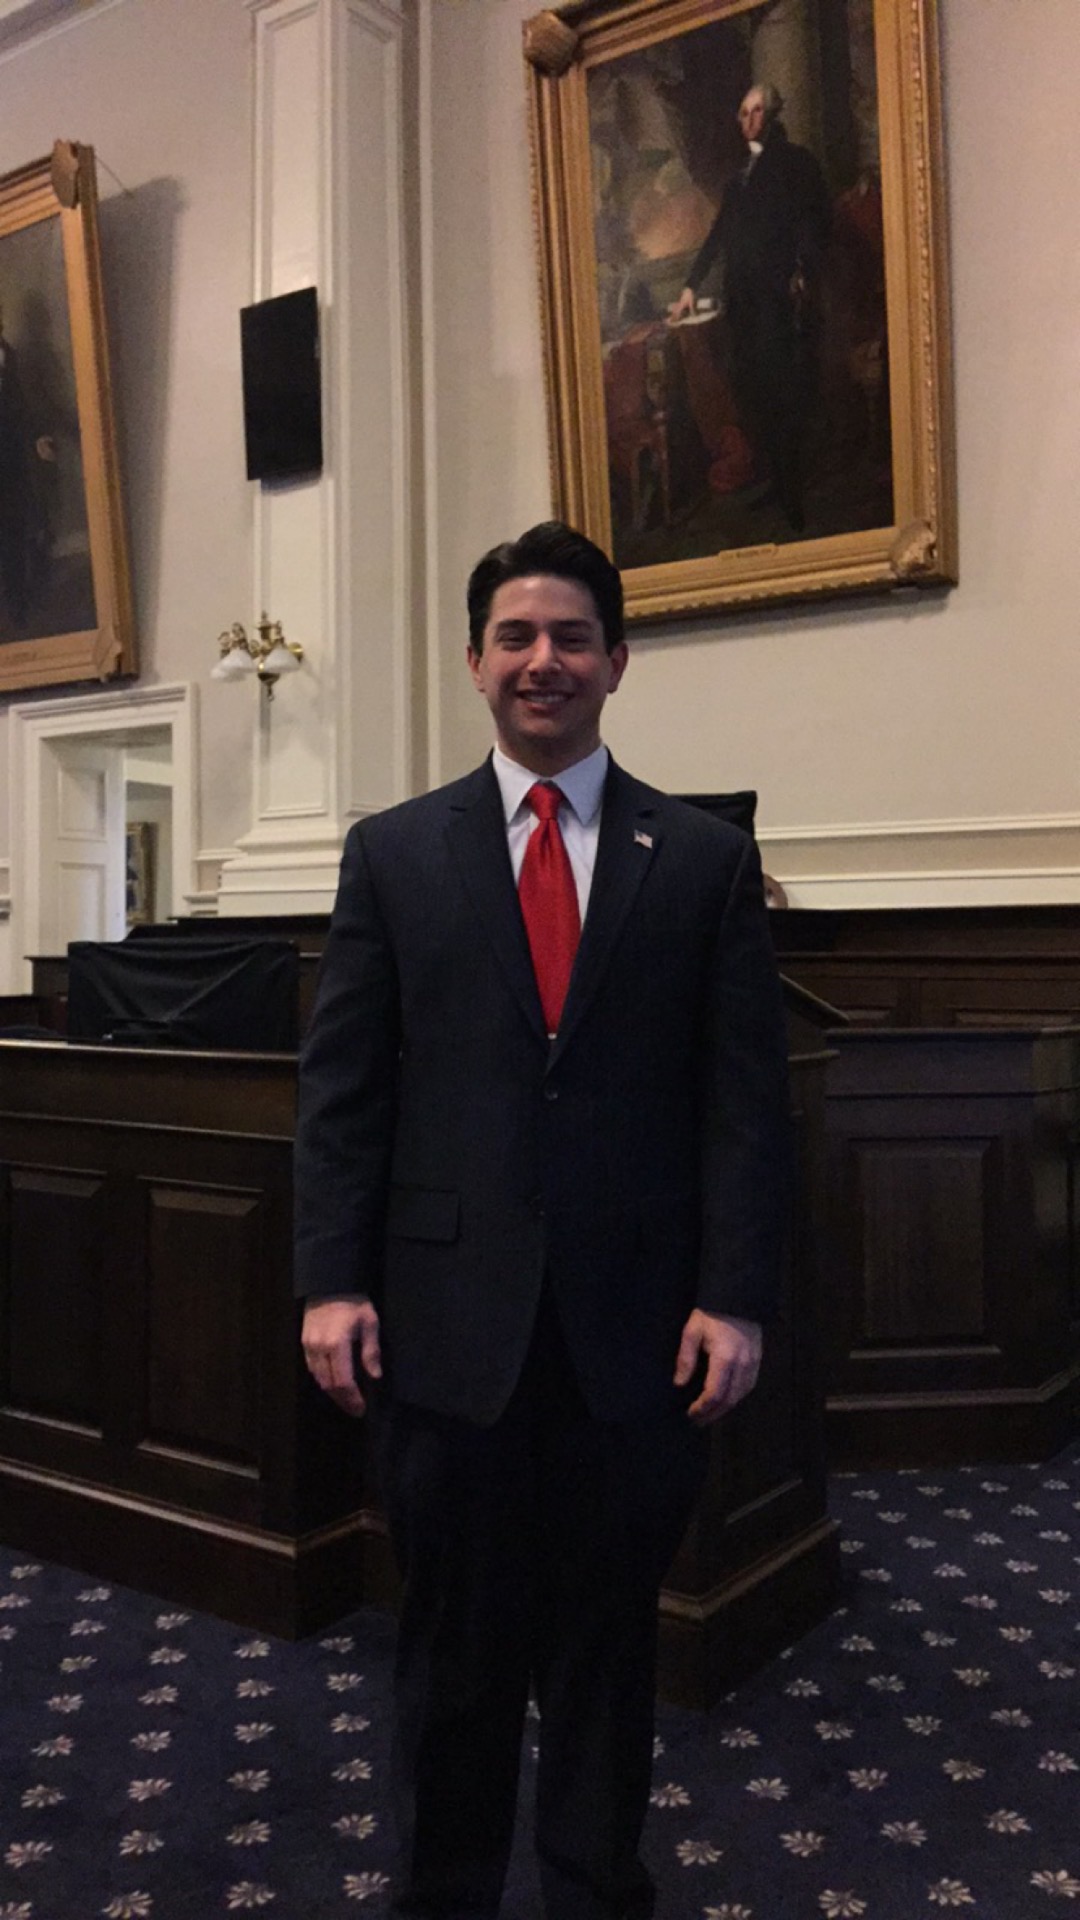 Neil A. Carousso poses in the New Hampshire House Chamber, the largest state House Chamber in the United States.